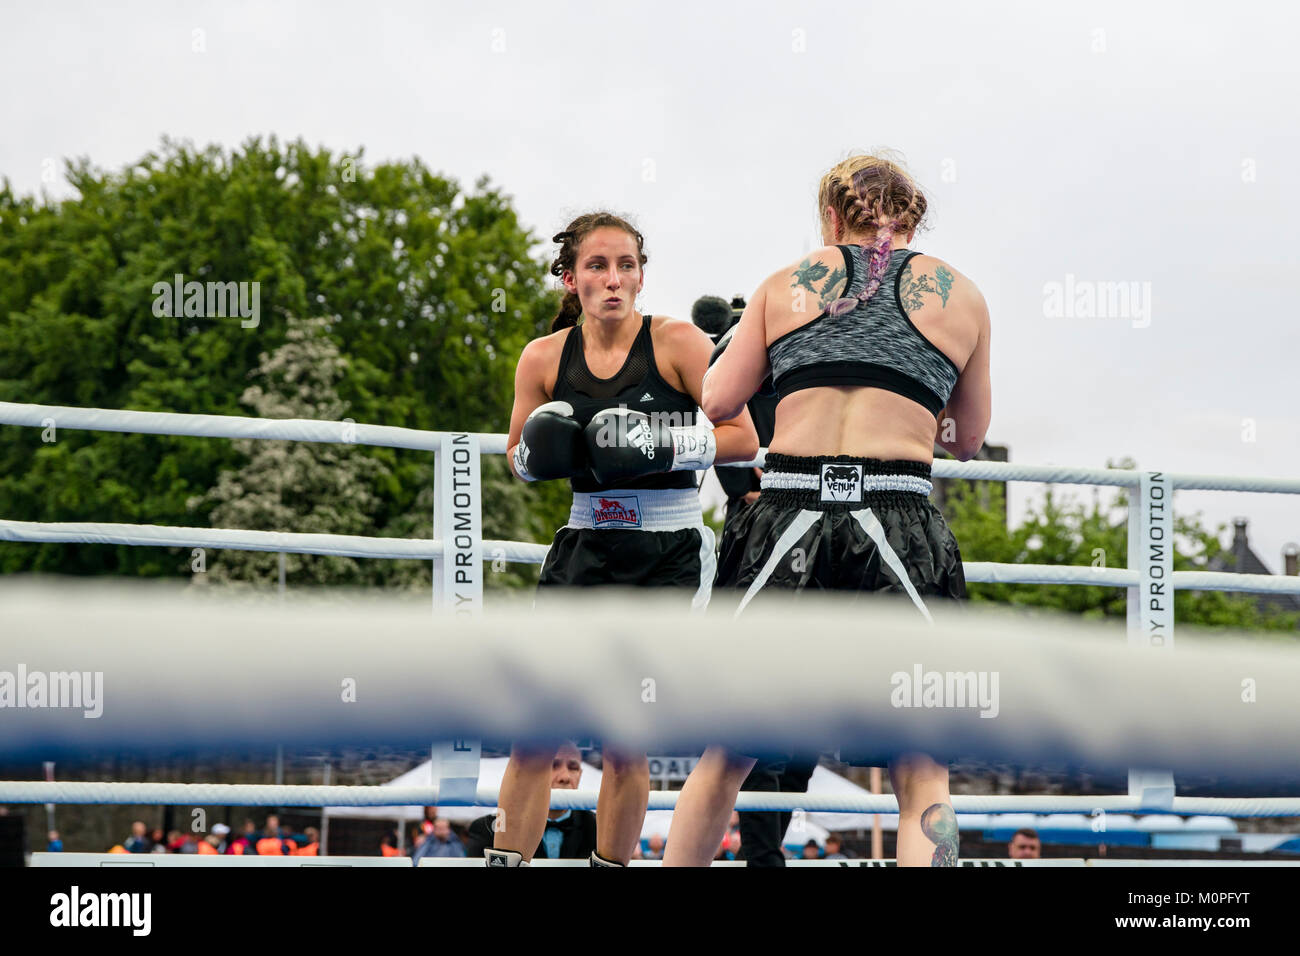 Norway, Bergen - June 09, 2017. The Icelandic boxer Valgerdur Gudsteinsdottir (R) fights the Hungarian boxer Marianna Gulyas (L) in the ring during the fight The Battle of Bergen in Bergen. (Photo credit: Gonzales Photo - Jarle H. Moe). Stock Photo